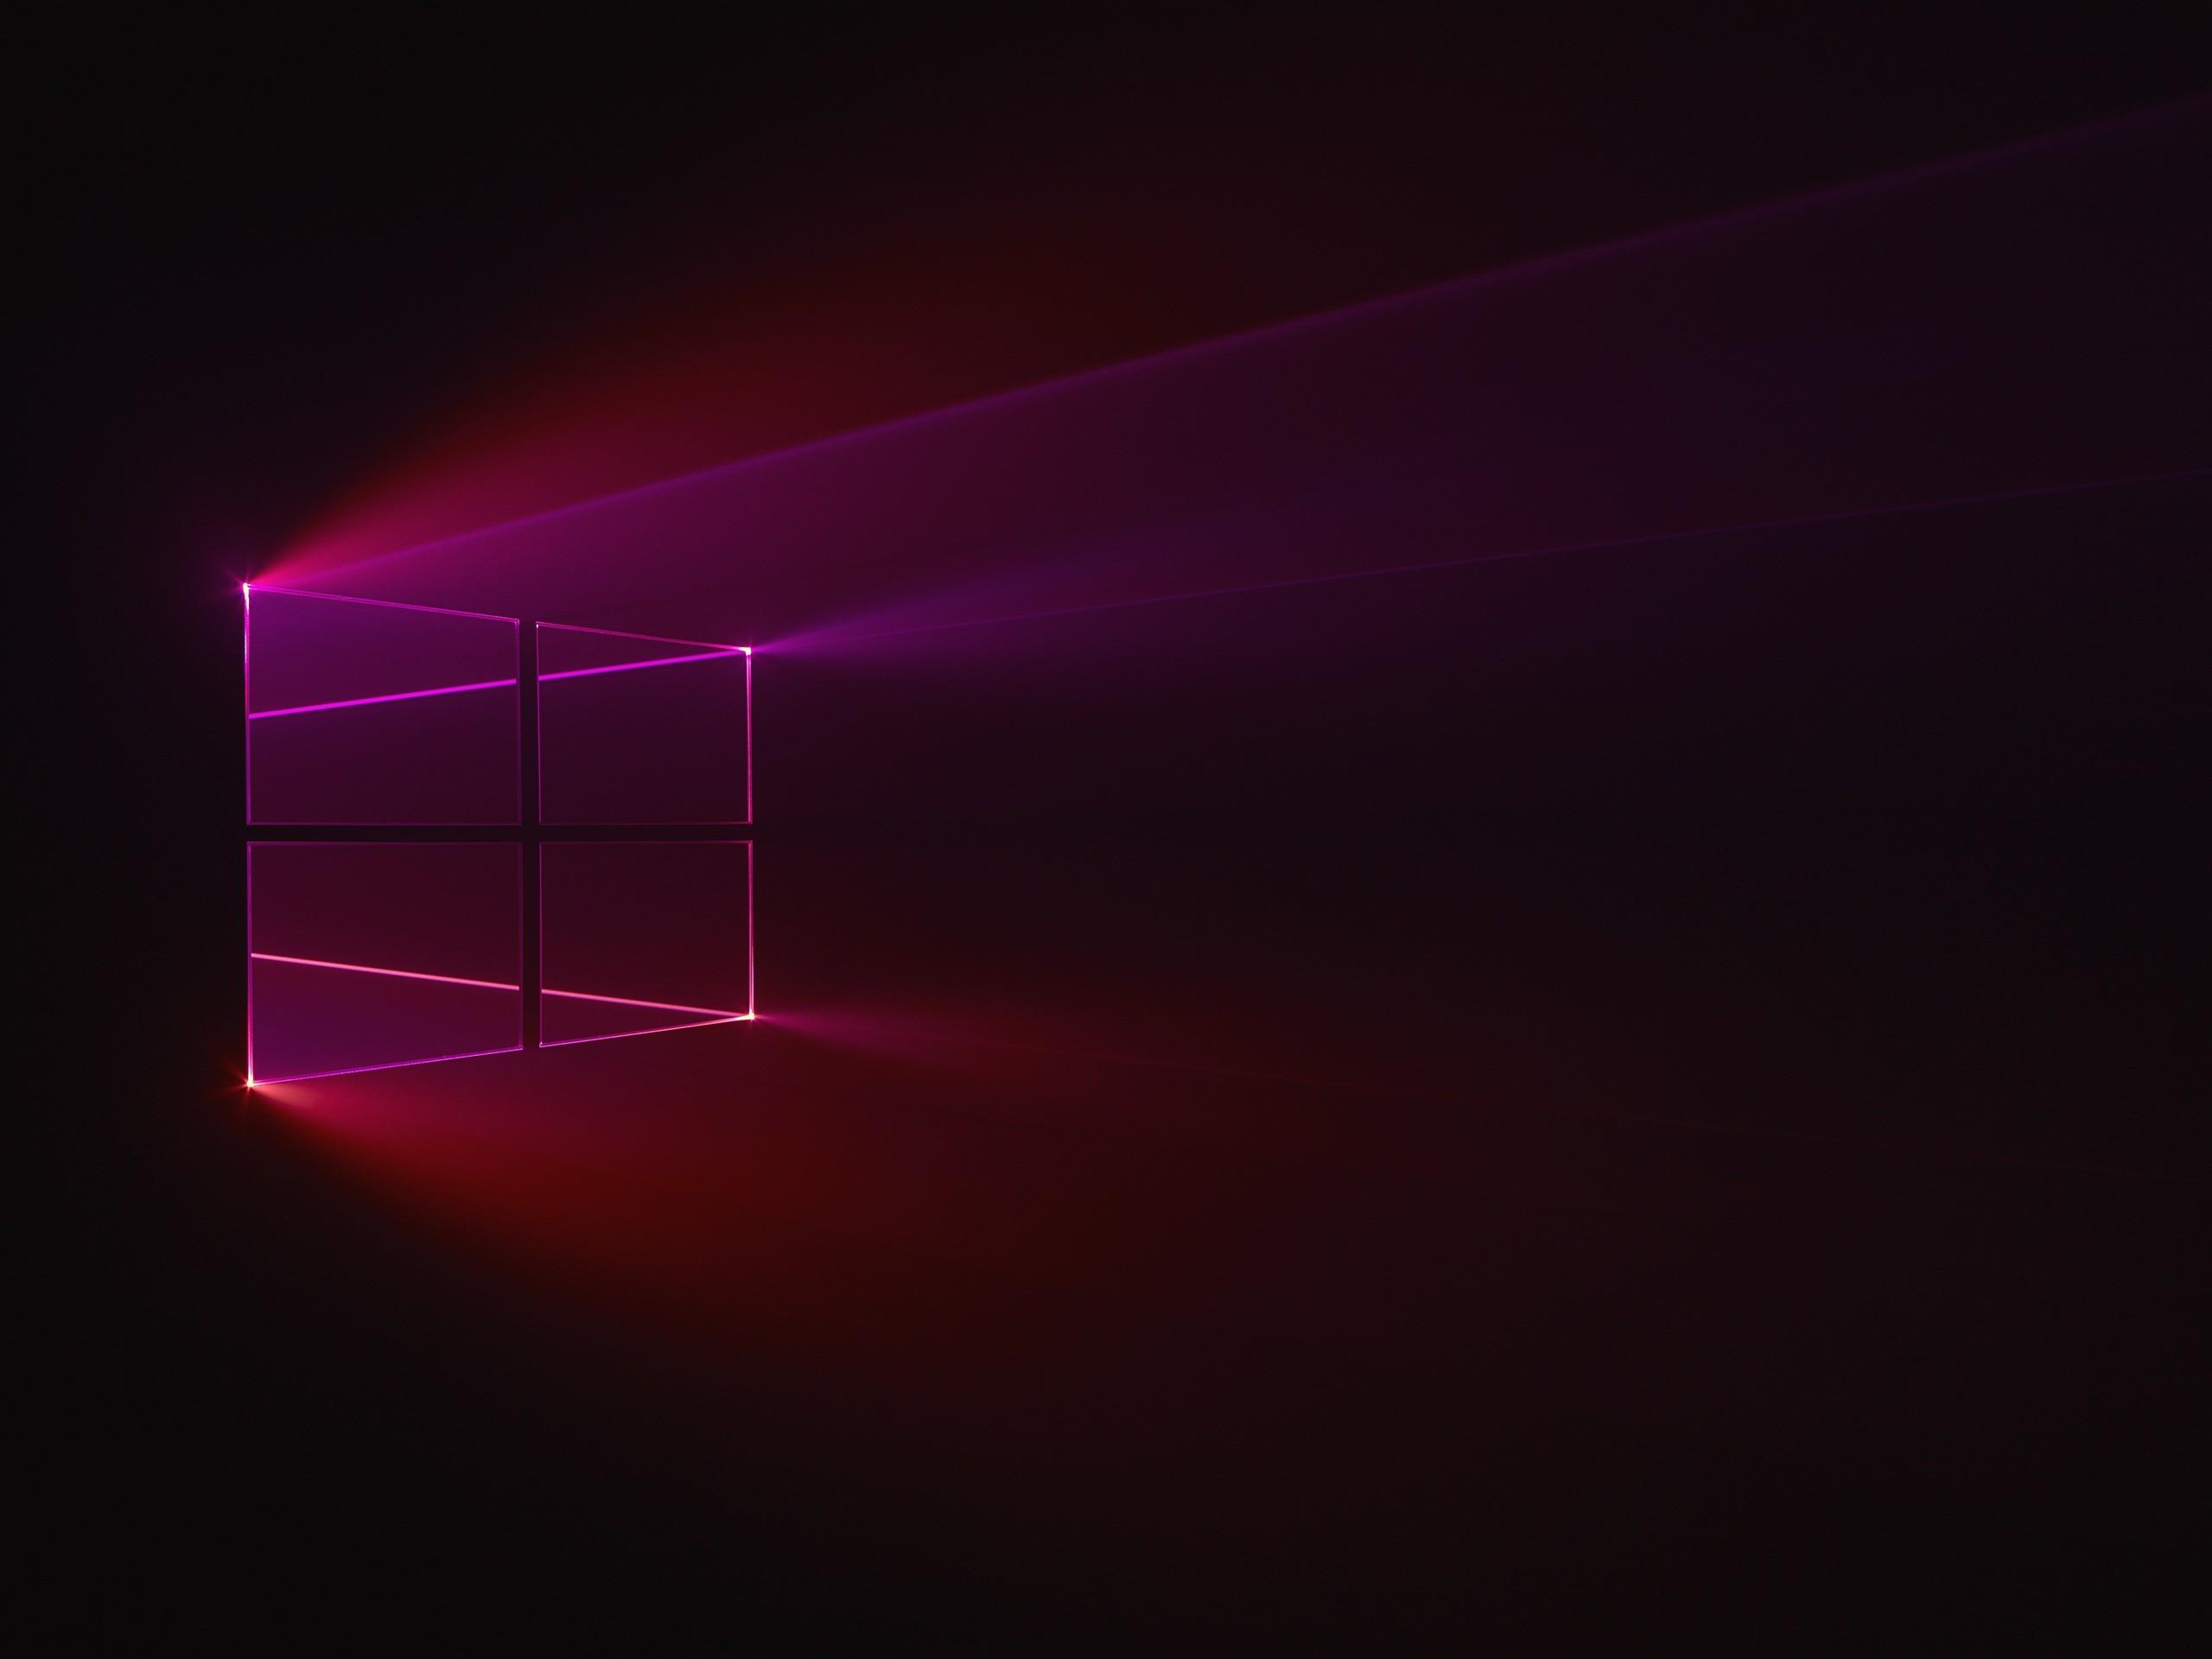 Windows 10 Red Wallpapers - Wallpaper Cave